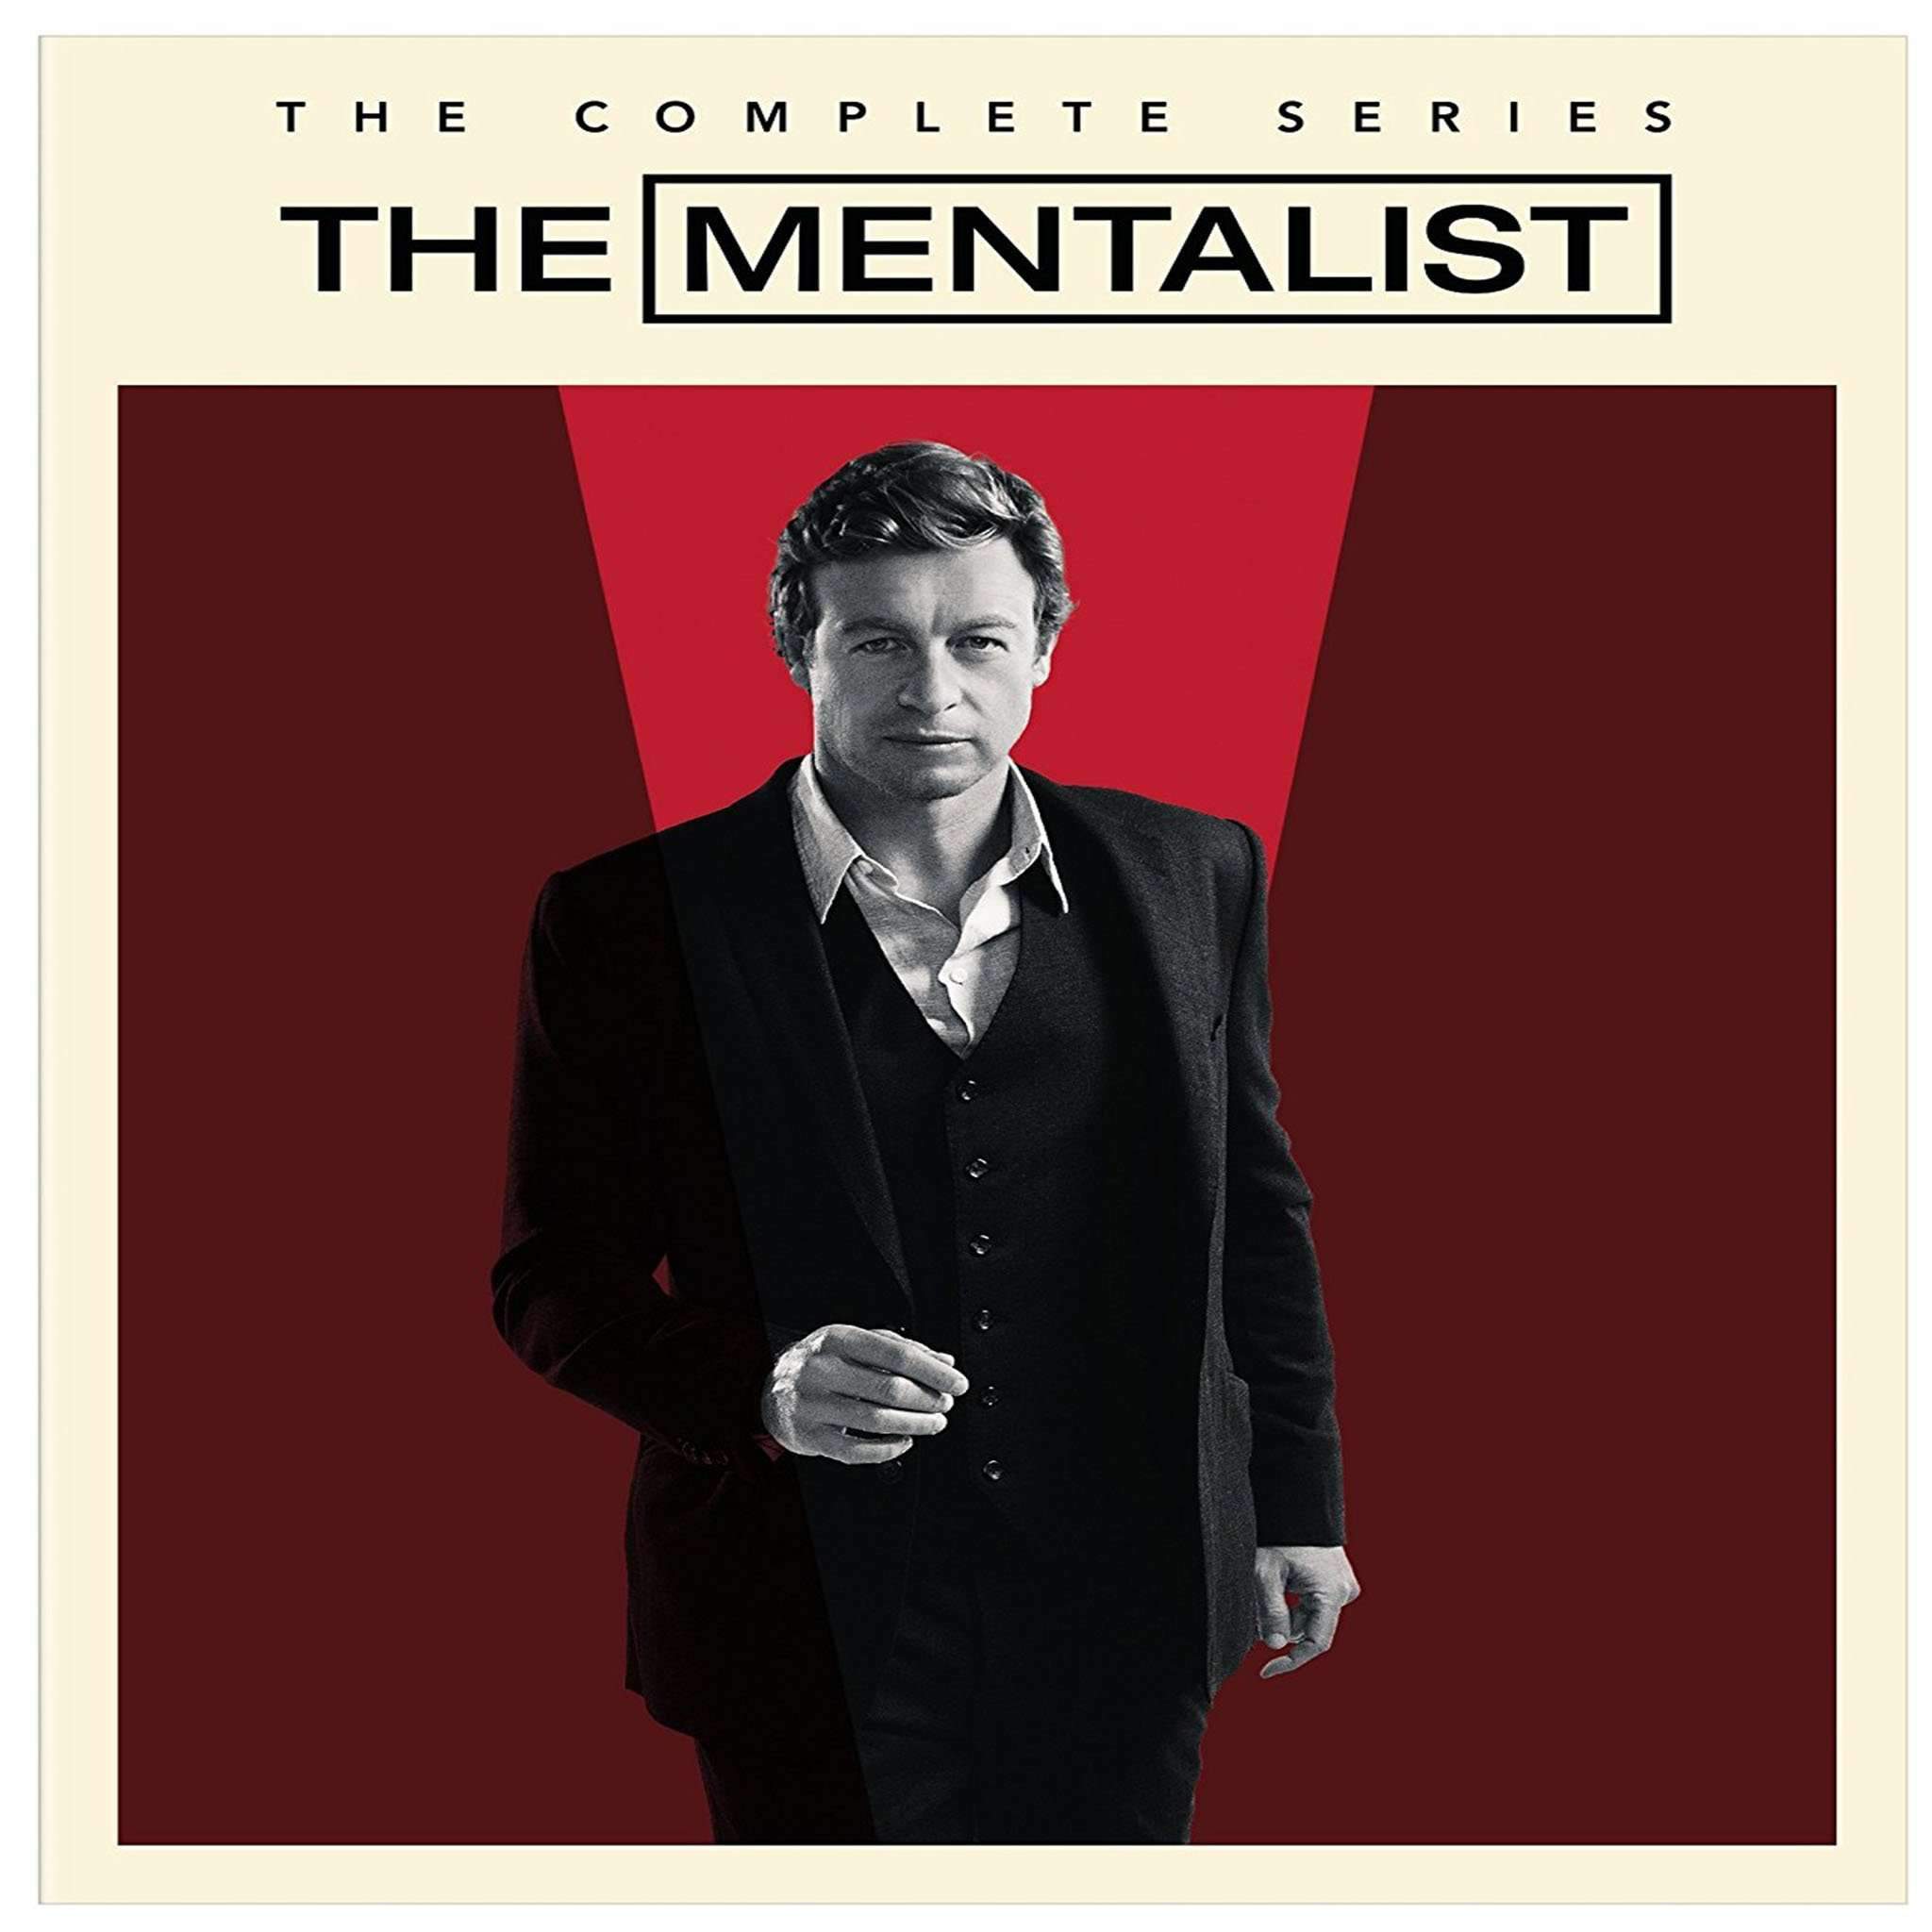 The Mentalist DVD Complete Series Box Set Warner Brothers DVDs & Blu-ray Discs > DVDs > Box Sets